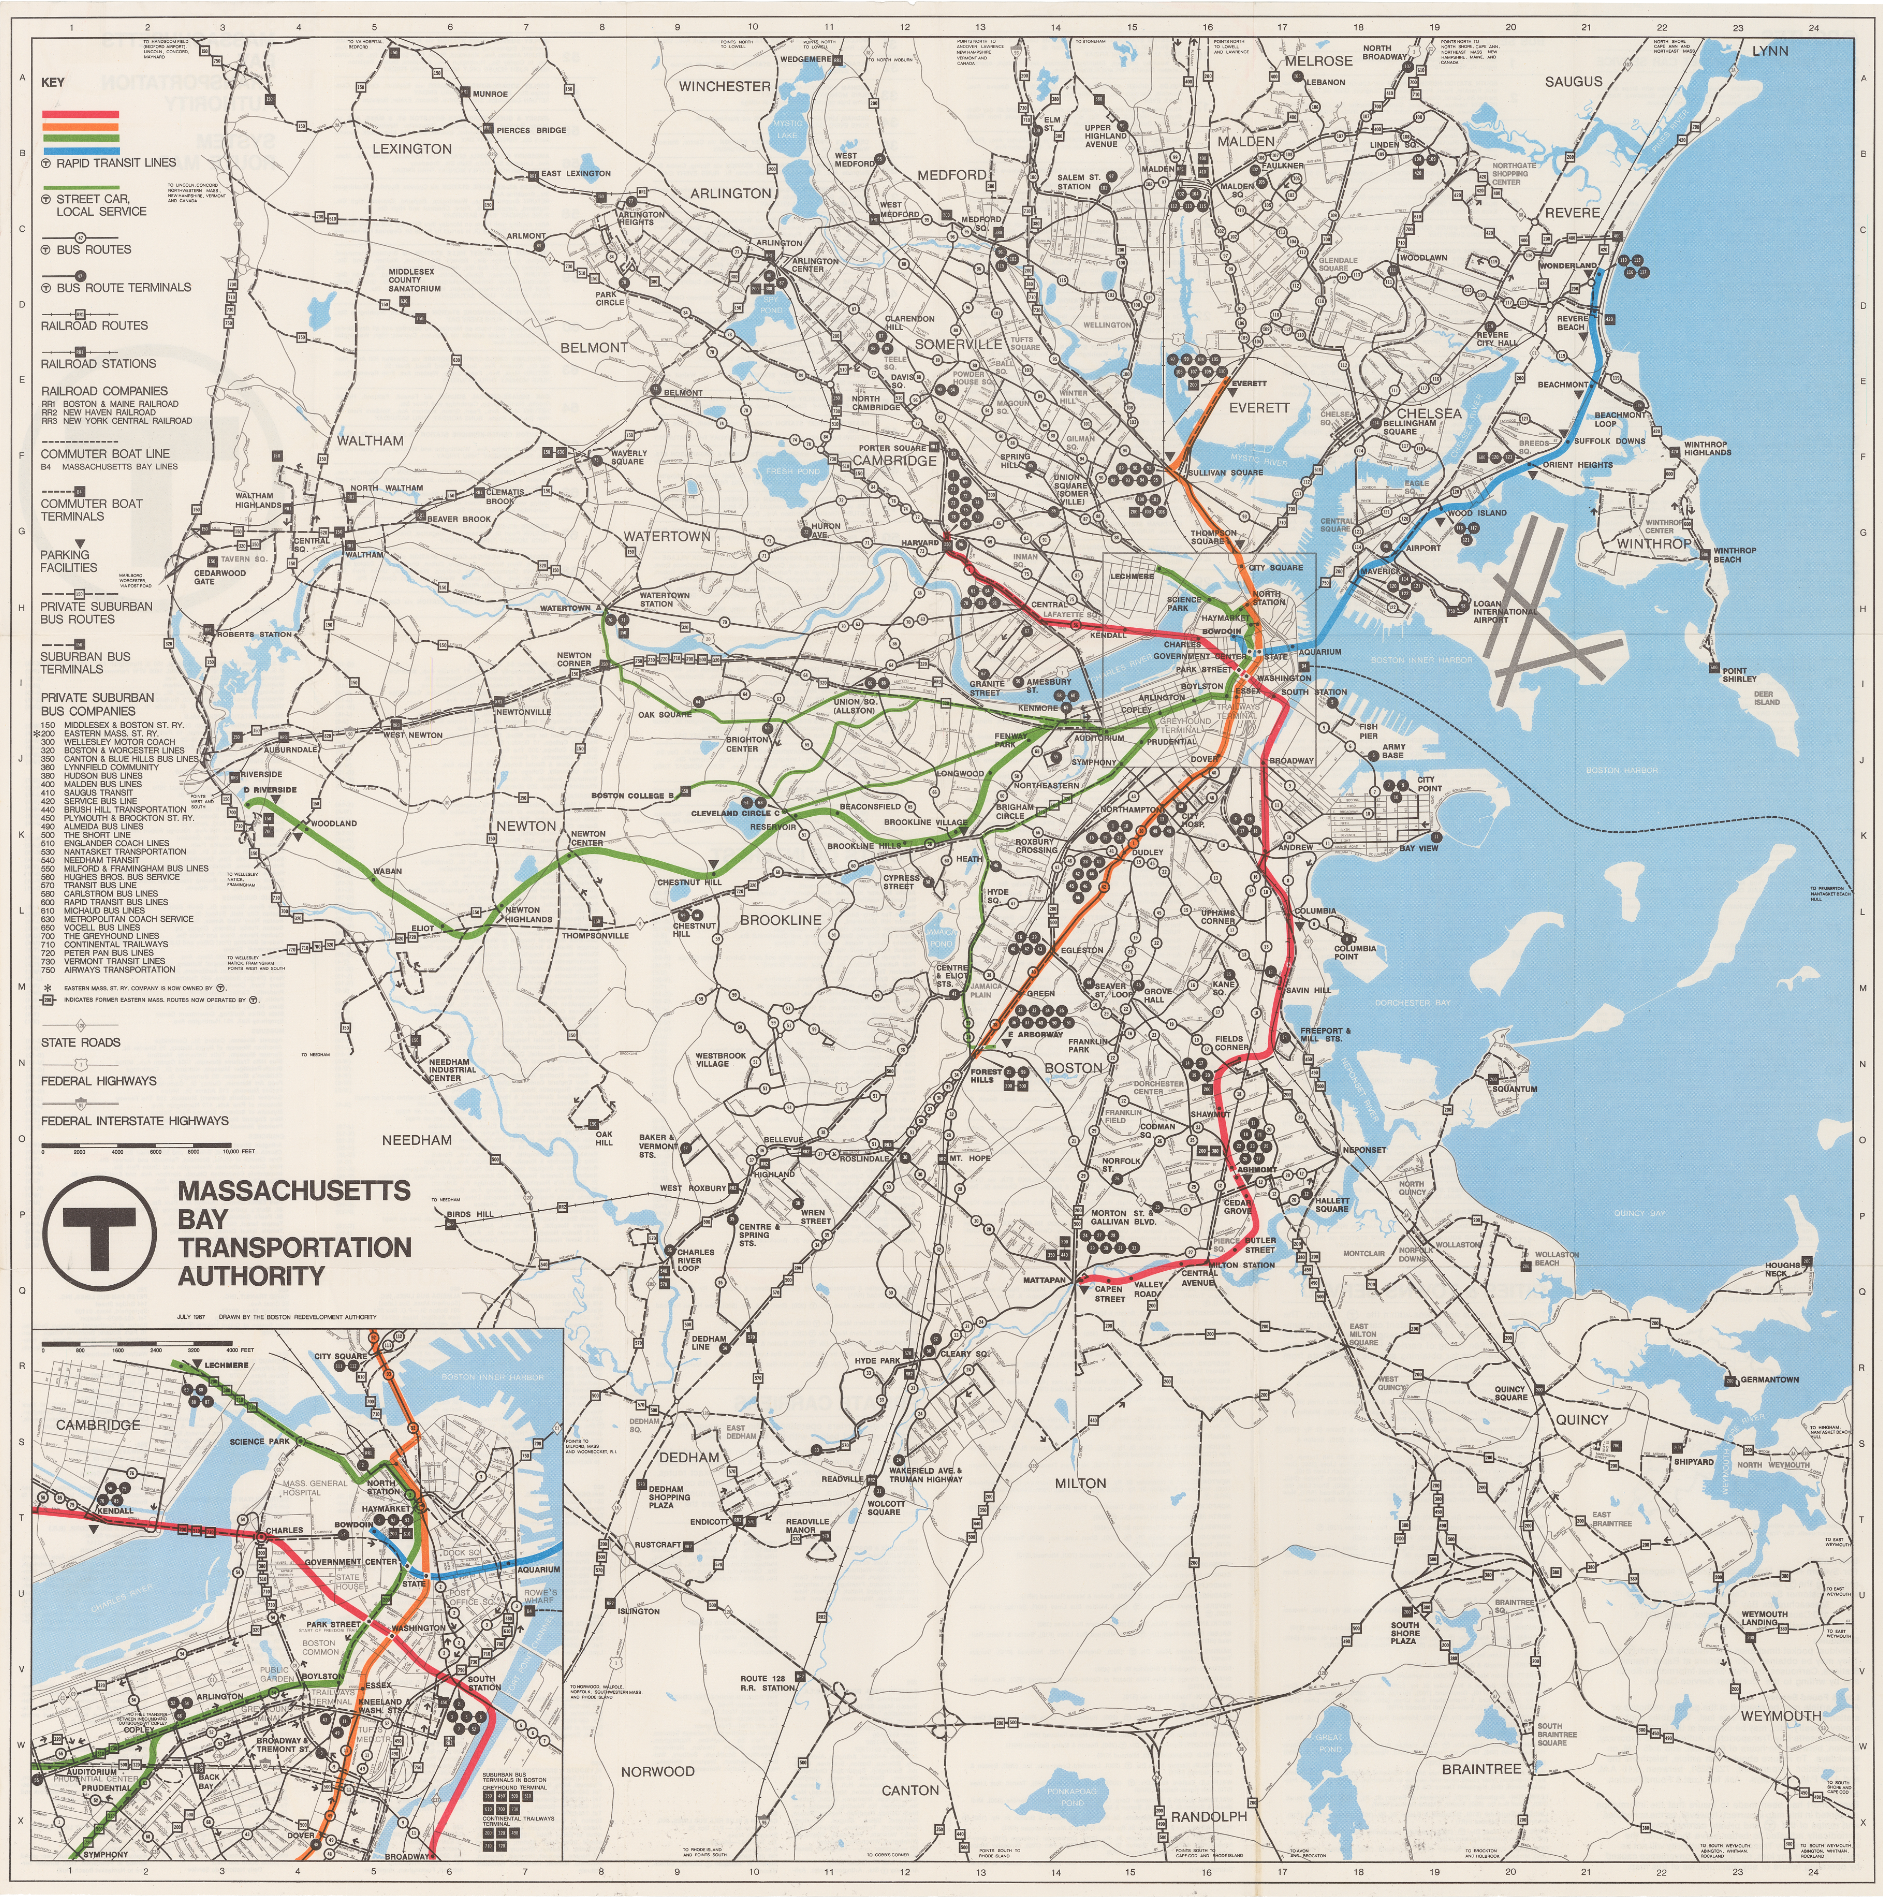 A highly detailed black and white line map of the Greater Boston area with the colored lines of the subway/trolley lines and branches overlaid at the map's center. A zoomed in view of Boston proper is inset at lower left. The map goes from Lexington at upper left to Lynn at upper right, and Dedham at lower left to Waymouth at lower right. A key at left includes symbols for bus, railroad, and ferry routes.